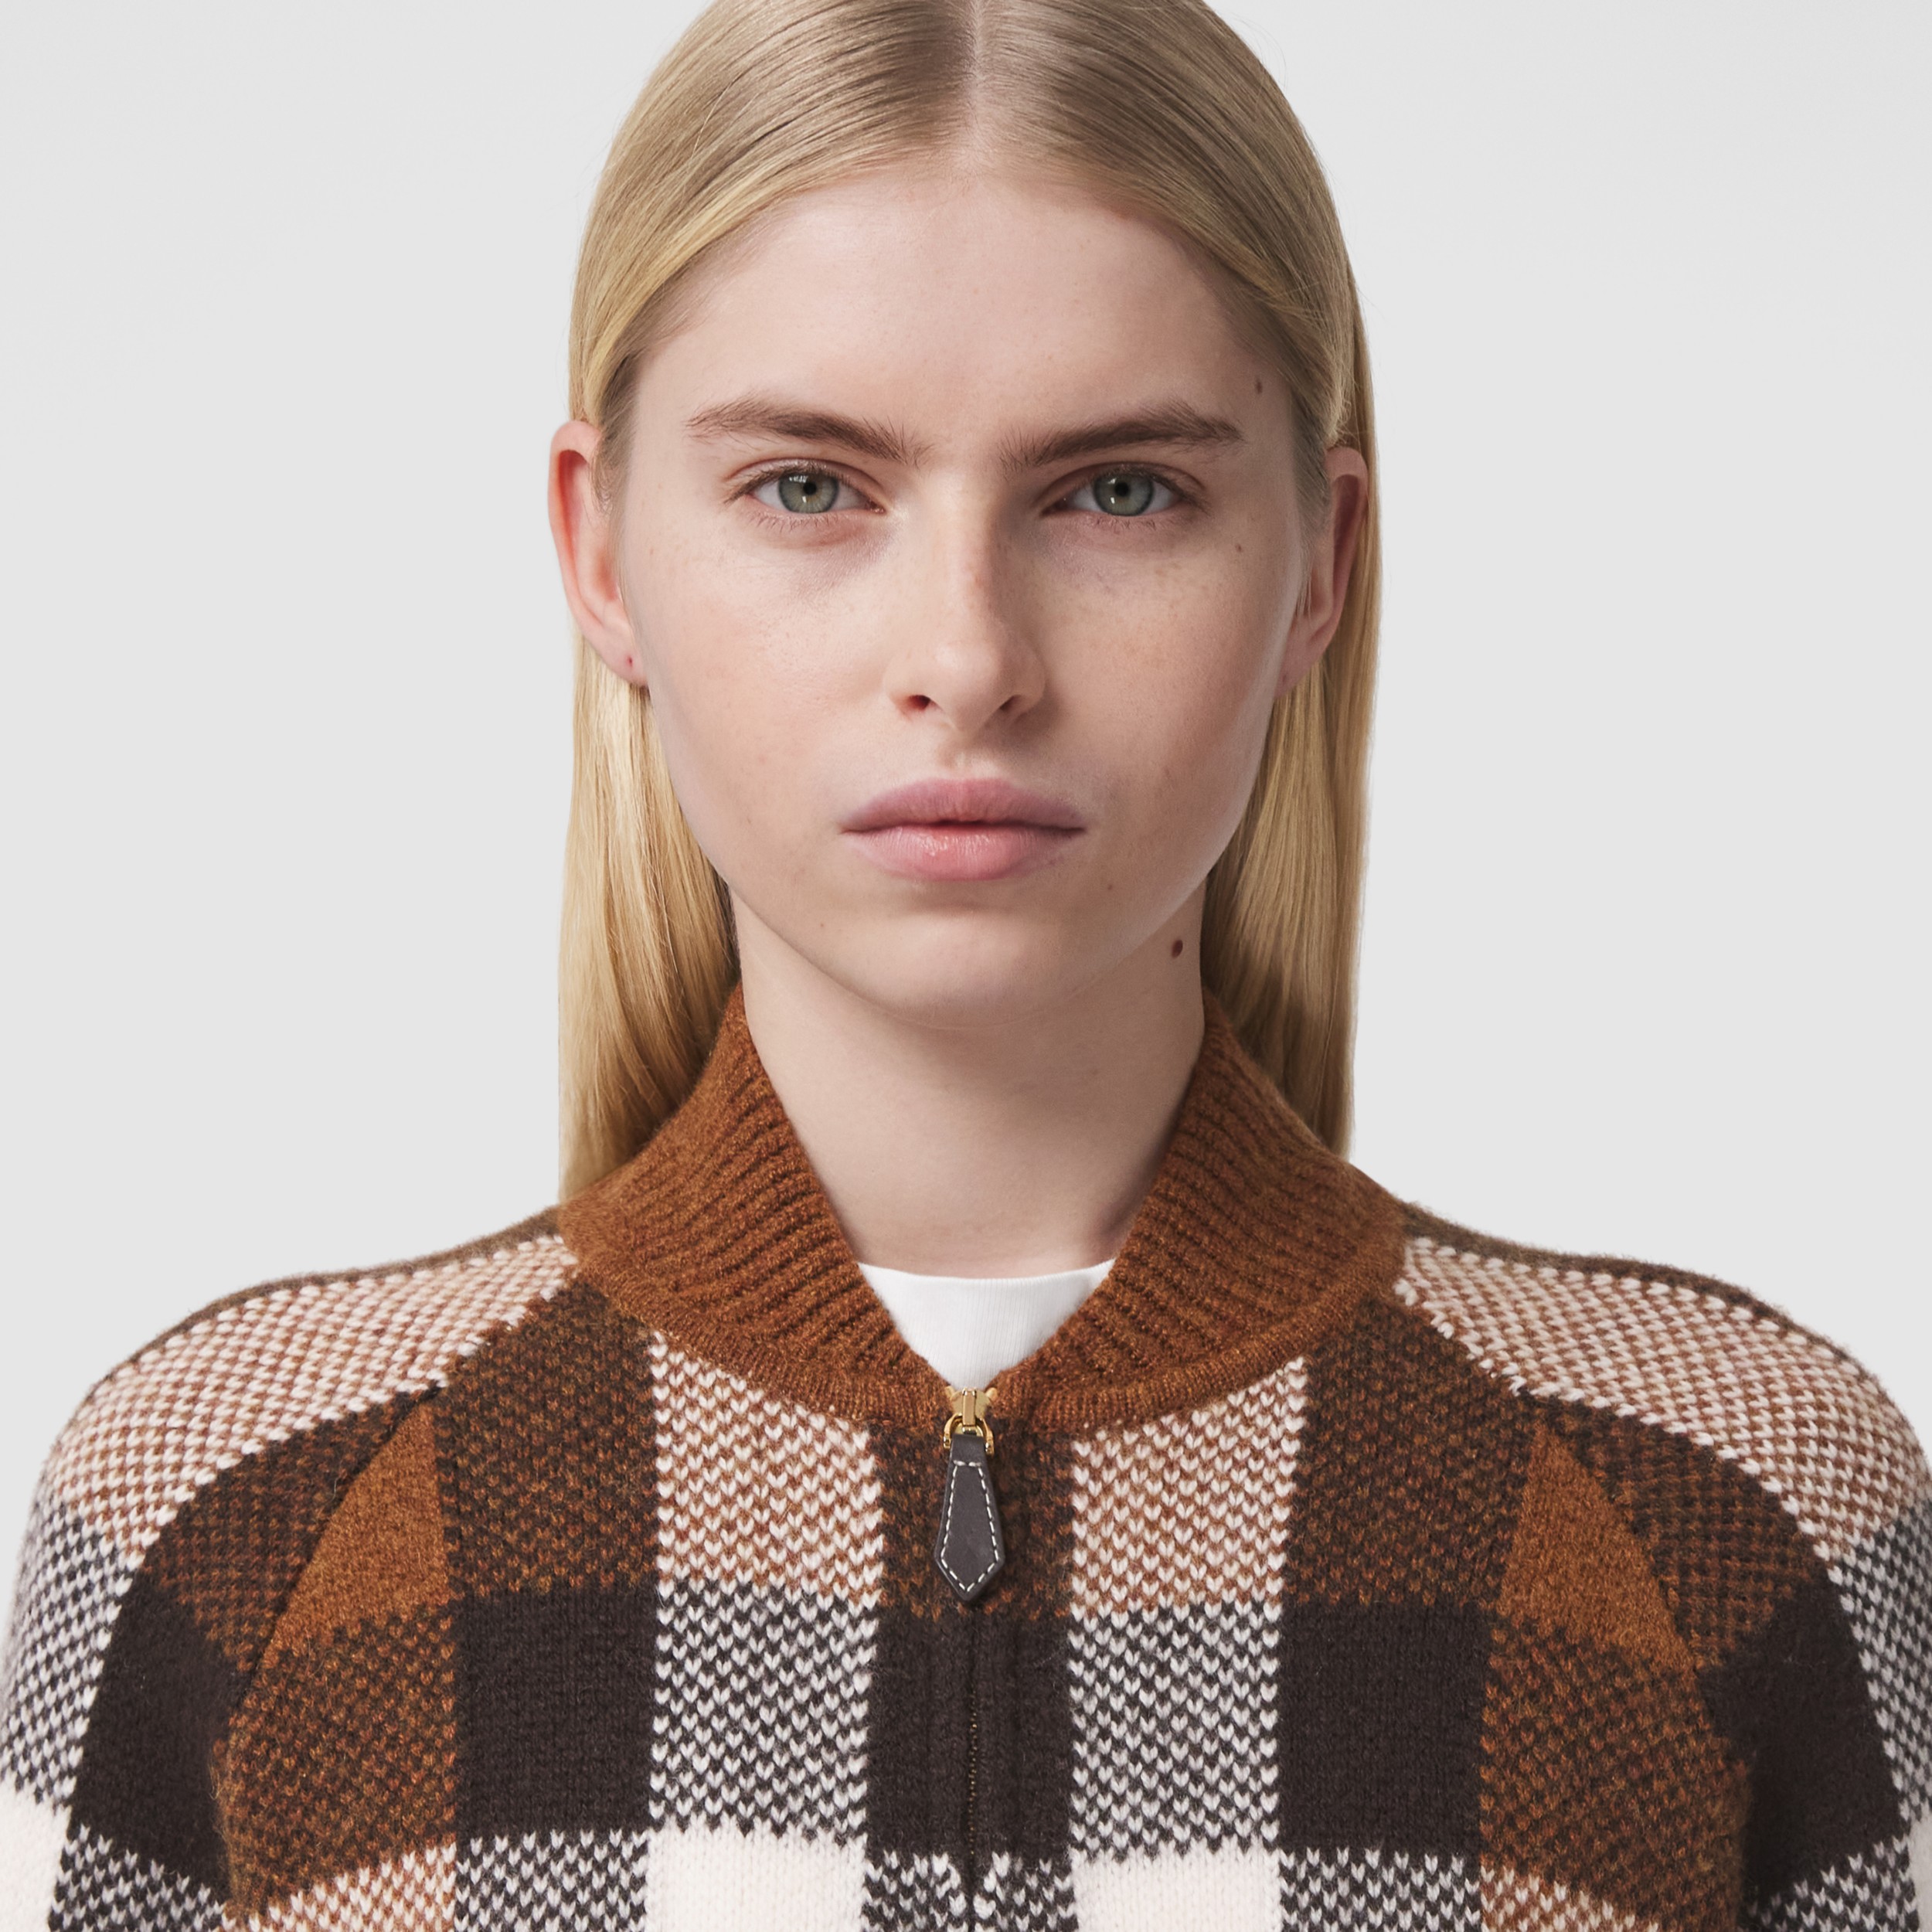 stereoanlæg champion lejlighed Check Intarsia Wool Cashmere Bomber Jacket in Dark Birch Brown - Women |  Burberry United States